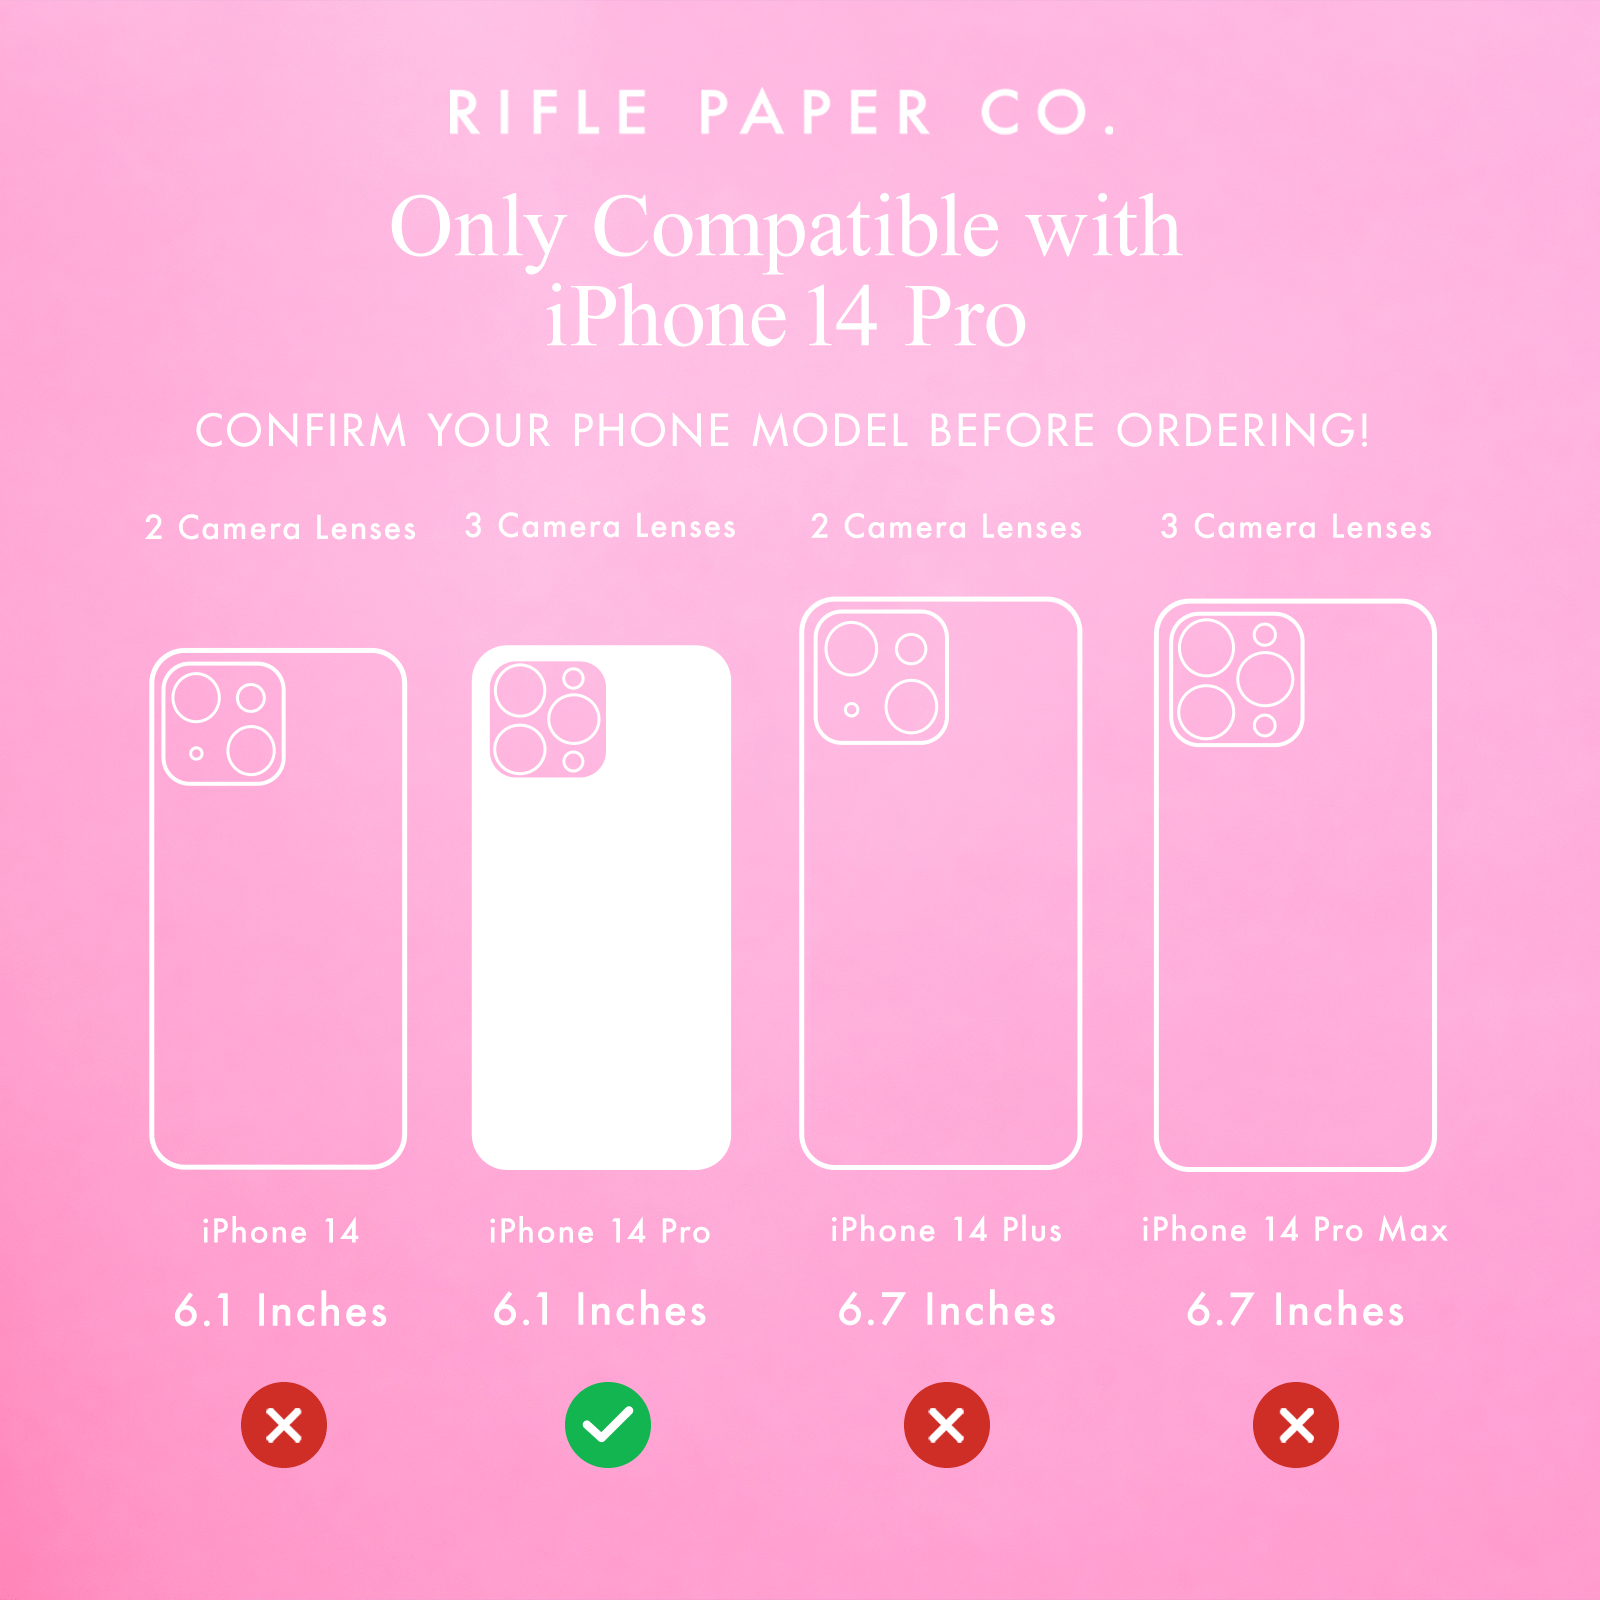 RIFLE PAPER CO. ONLY COMPATIBLE WITH IPHONE 14 PRO. CONFIRM YOUR PHONE MODEL BEFORE ORDERING!